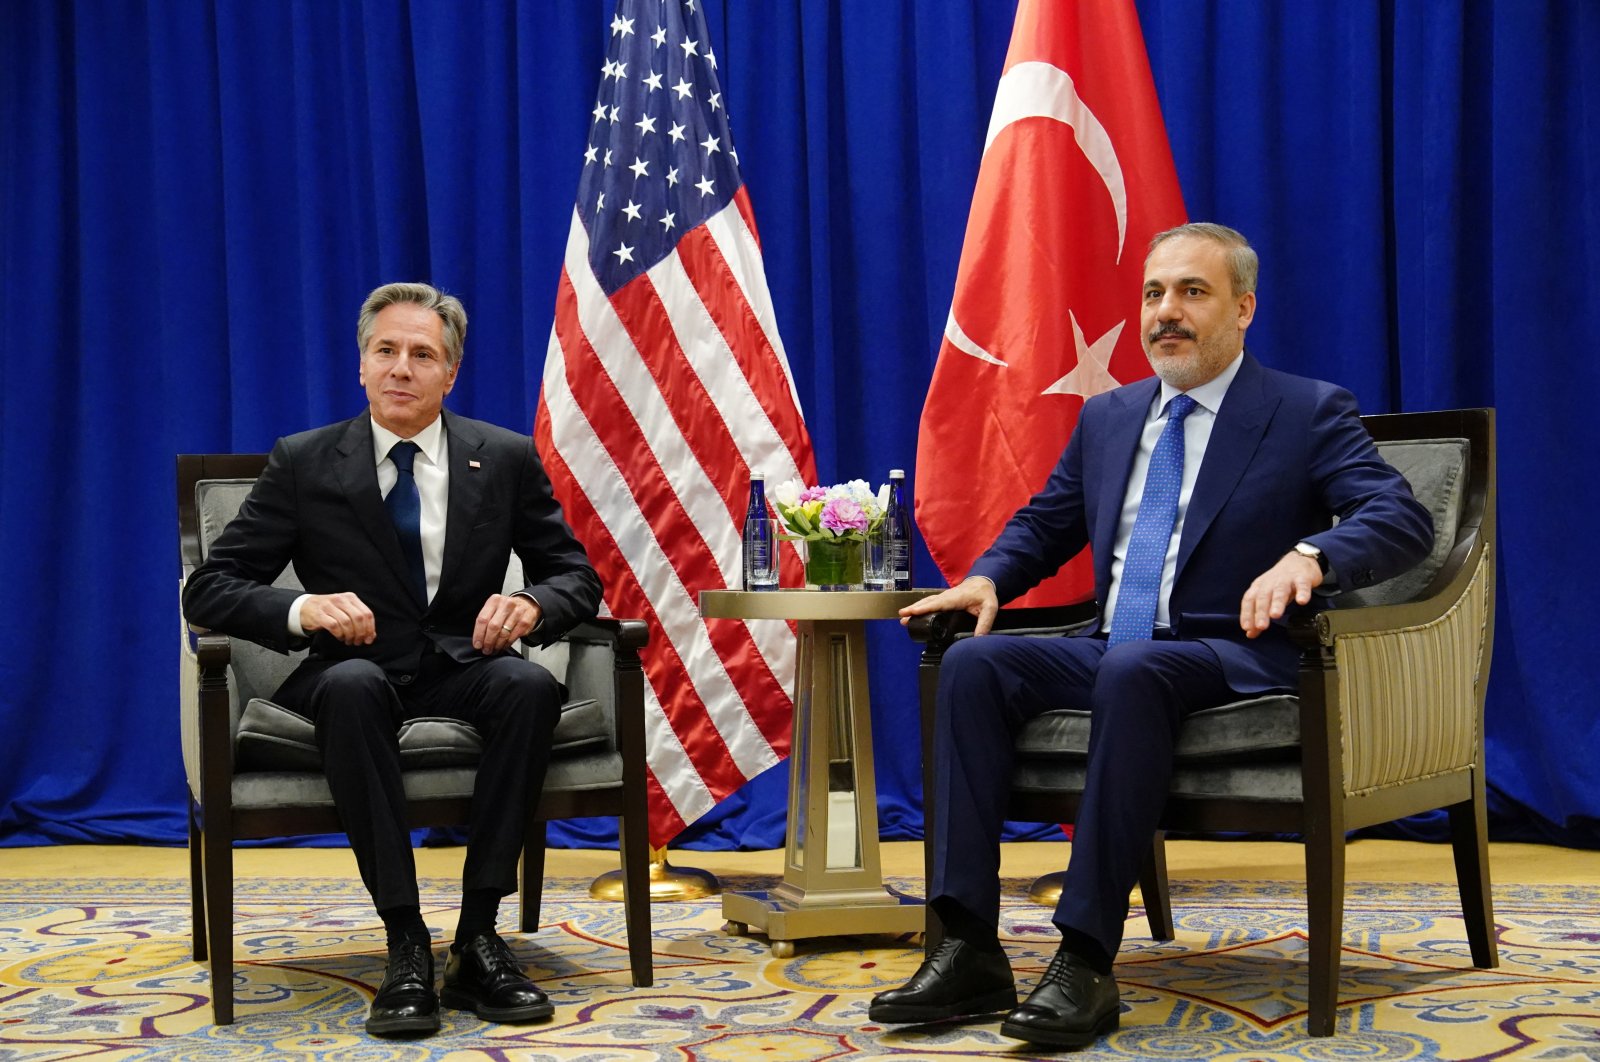 Foreign Minister Hakan Fidan and U.S. Secretary of State Antony Blinken pose for a picture, on the sidelines of the 78th United Nations General Assembly at the Lotte Palace Hotel in New York City, U.S., Sept. 22, 2023.  (Reuters File Photo)